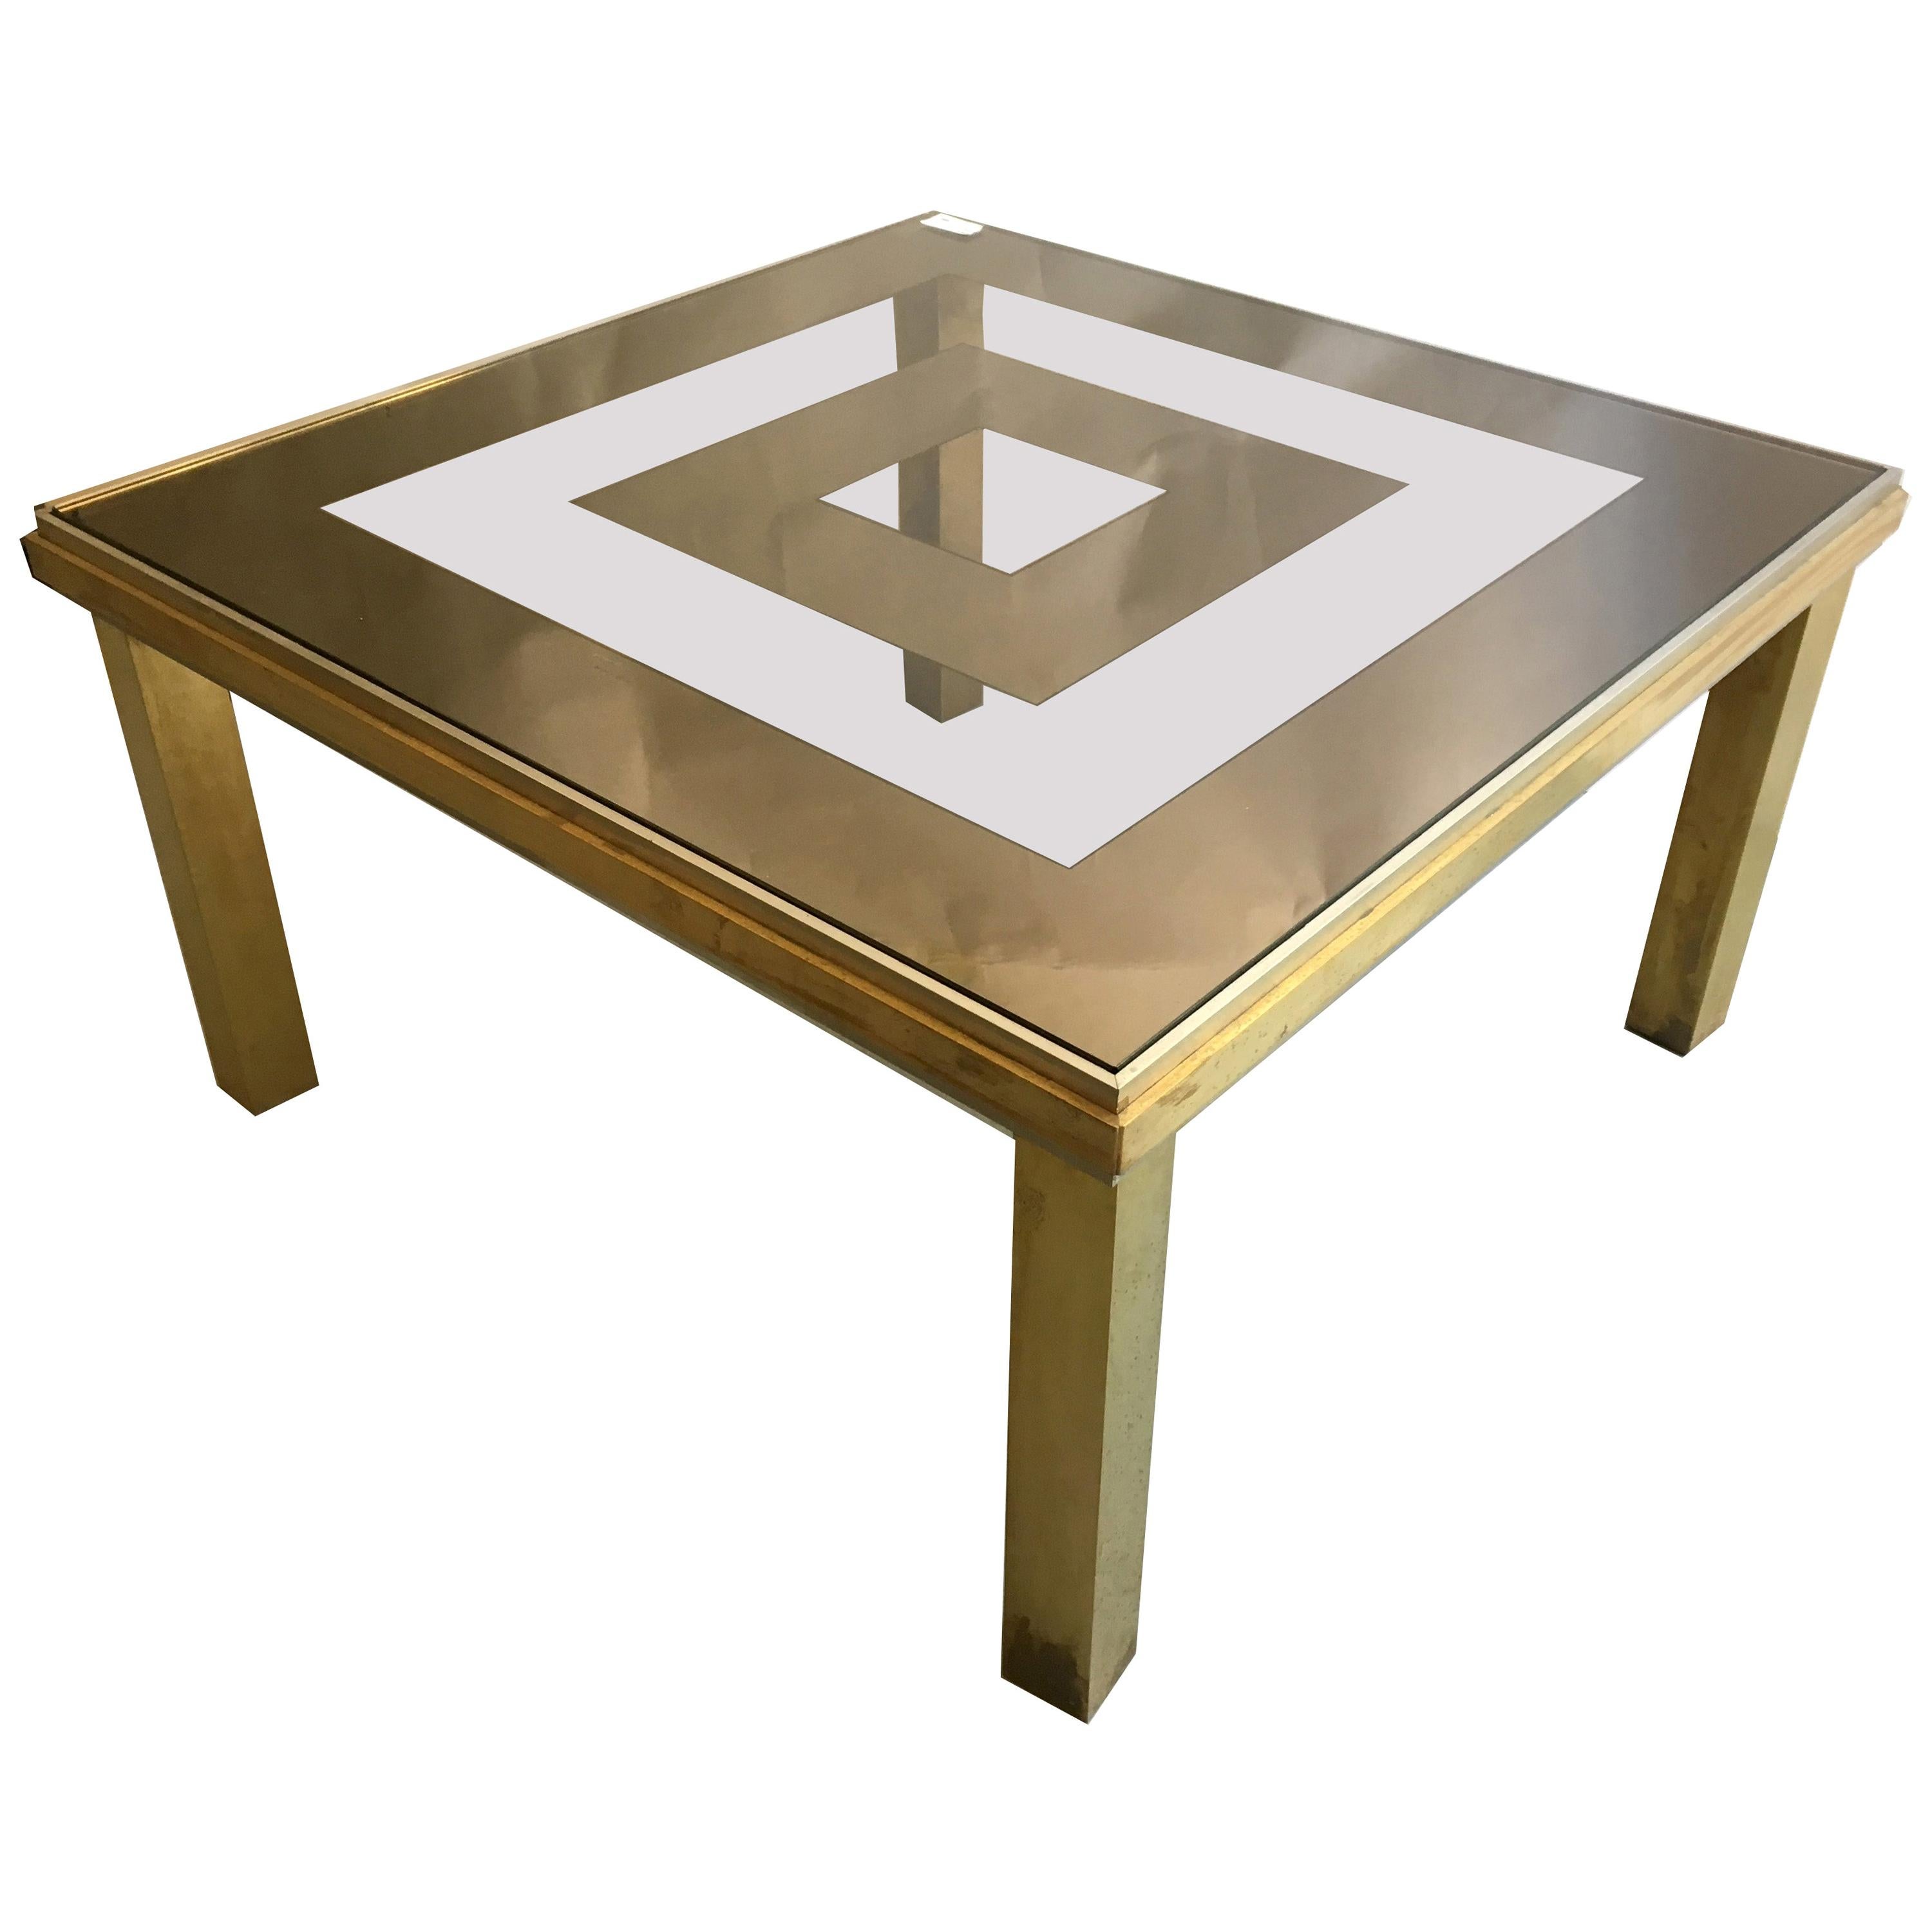 Brass and Glass Square Coffee Table, Italy, 1970s